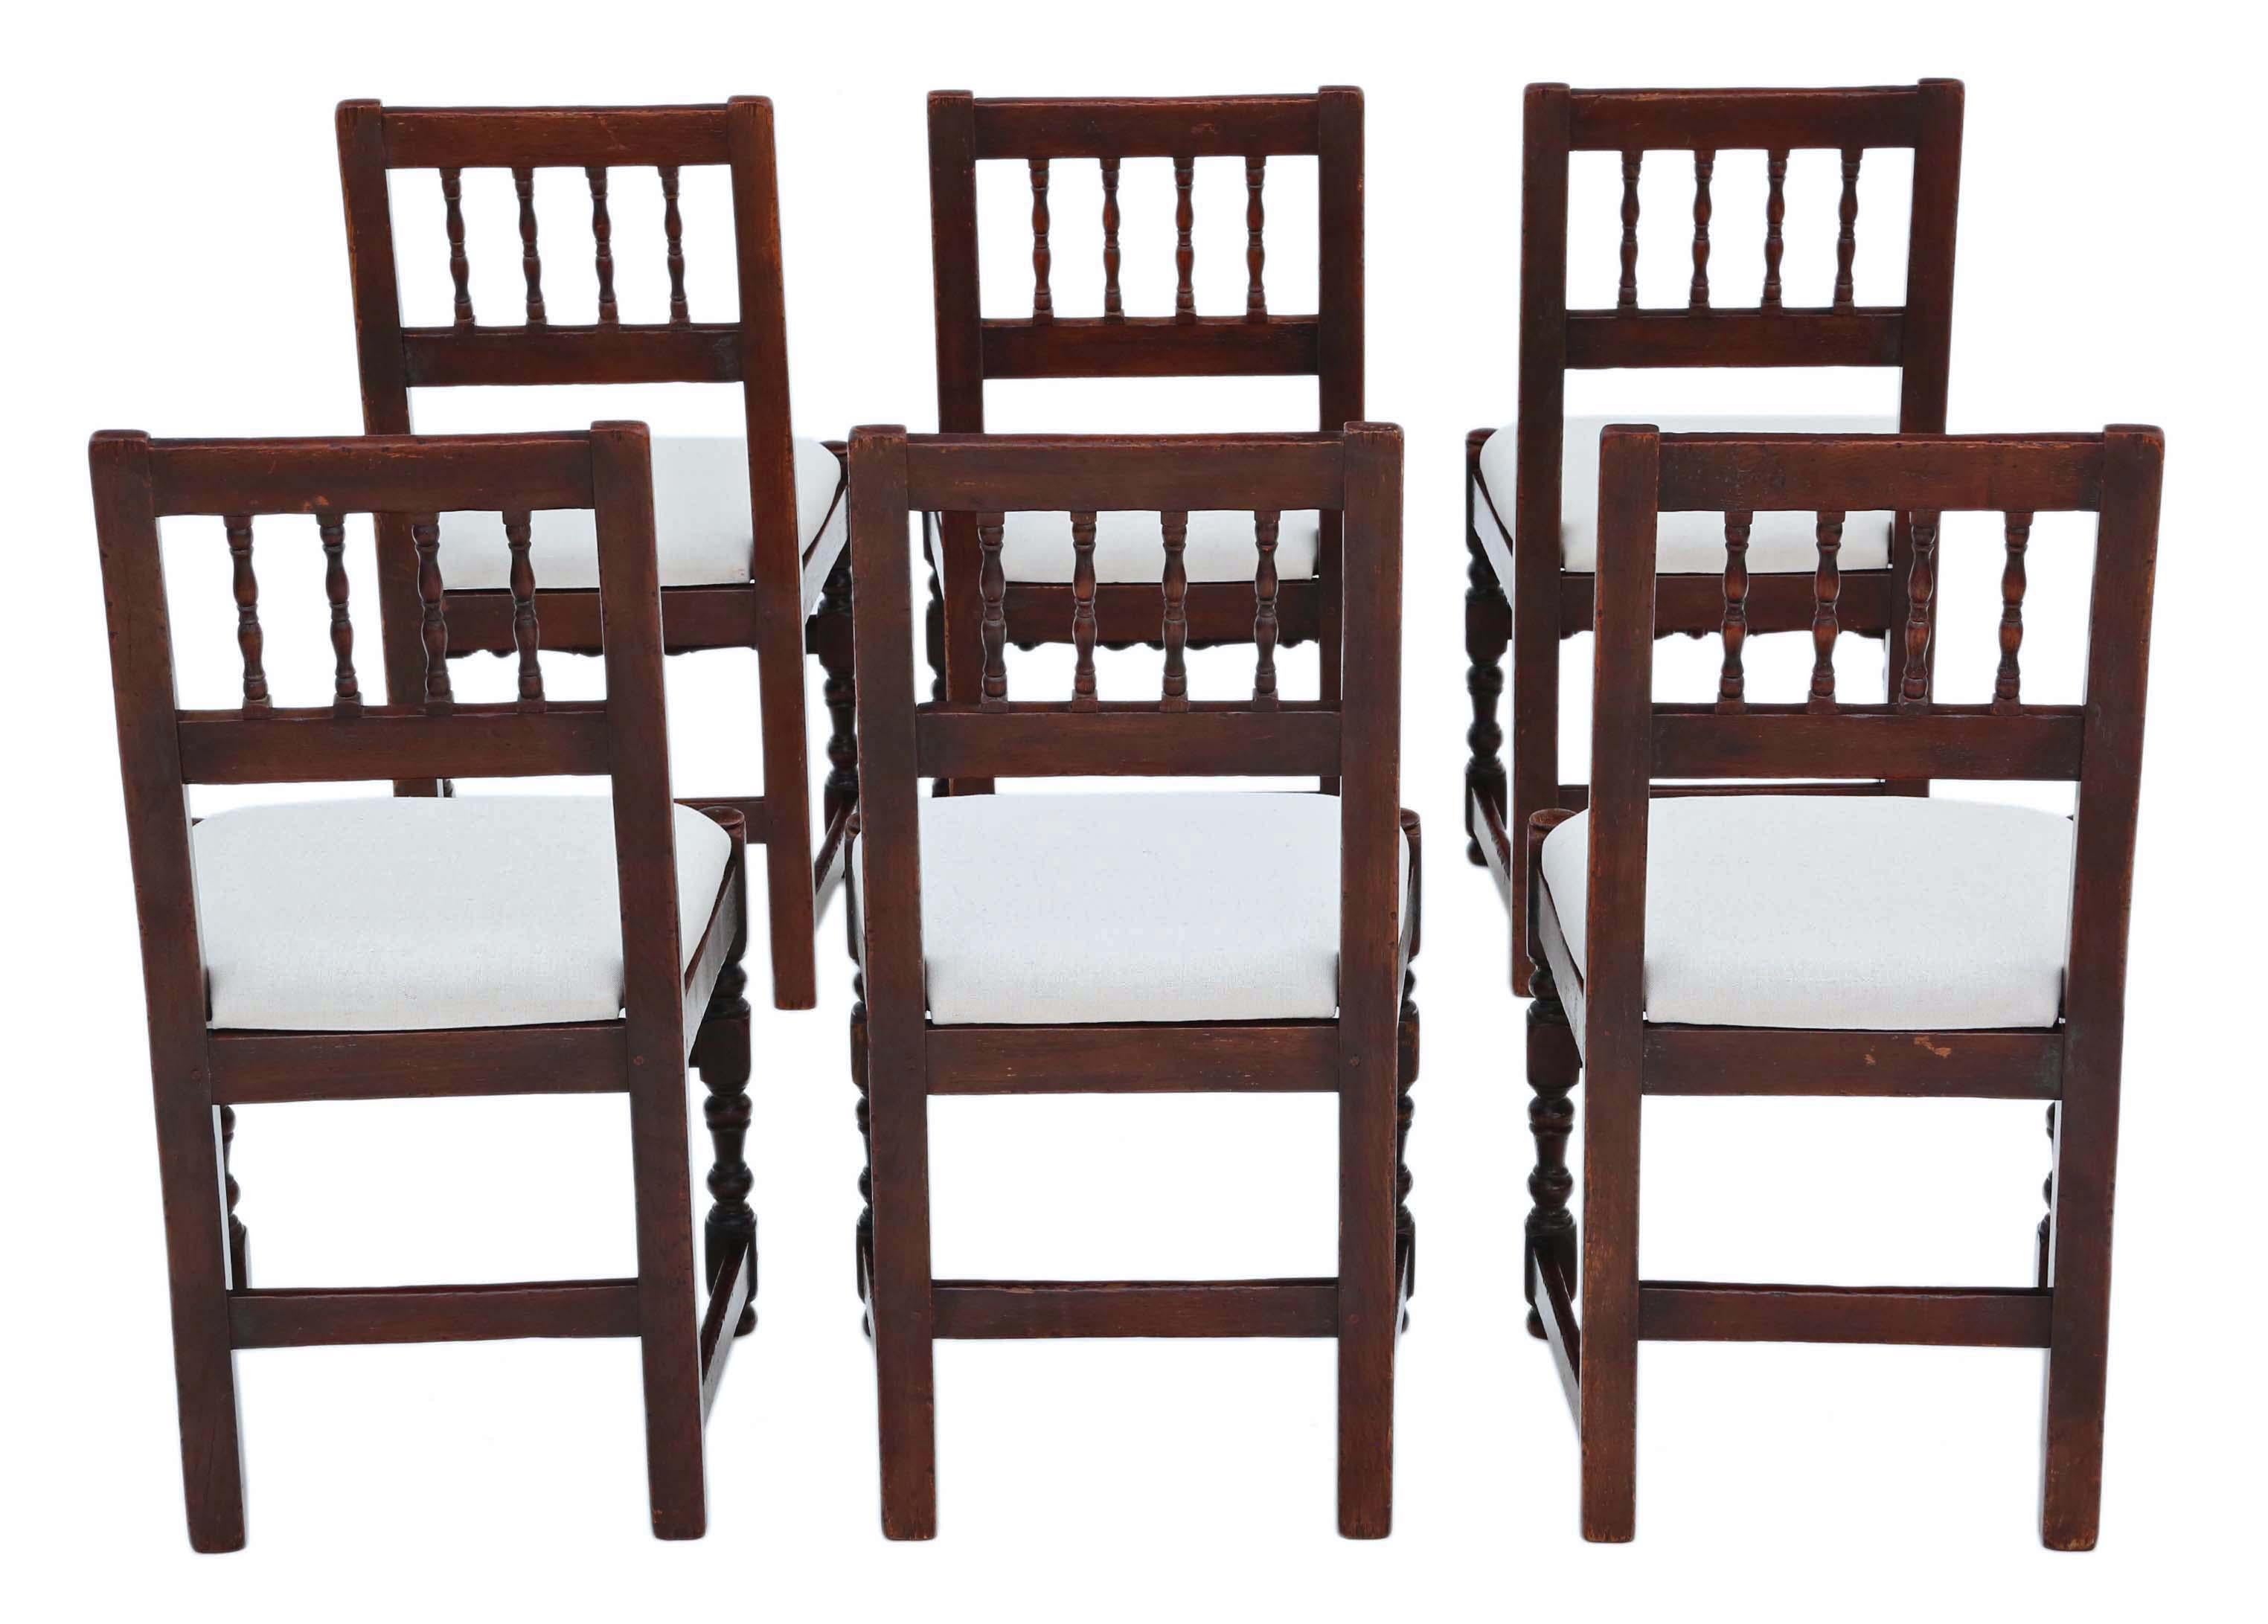 Antique quality set of 6 19th Century rustic oak kitchen or dining chairs.

No loose joints or woodworm.

New professional upholstery. 

Overall maximum dimensions: 48cmW x 48cmD x 93cmH (48cmH seat when sat on)

Good antique condition with minor